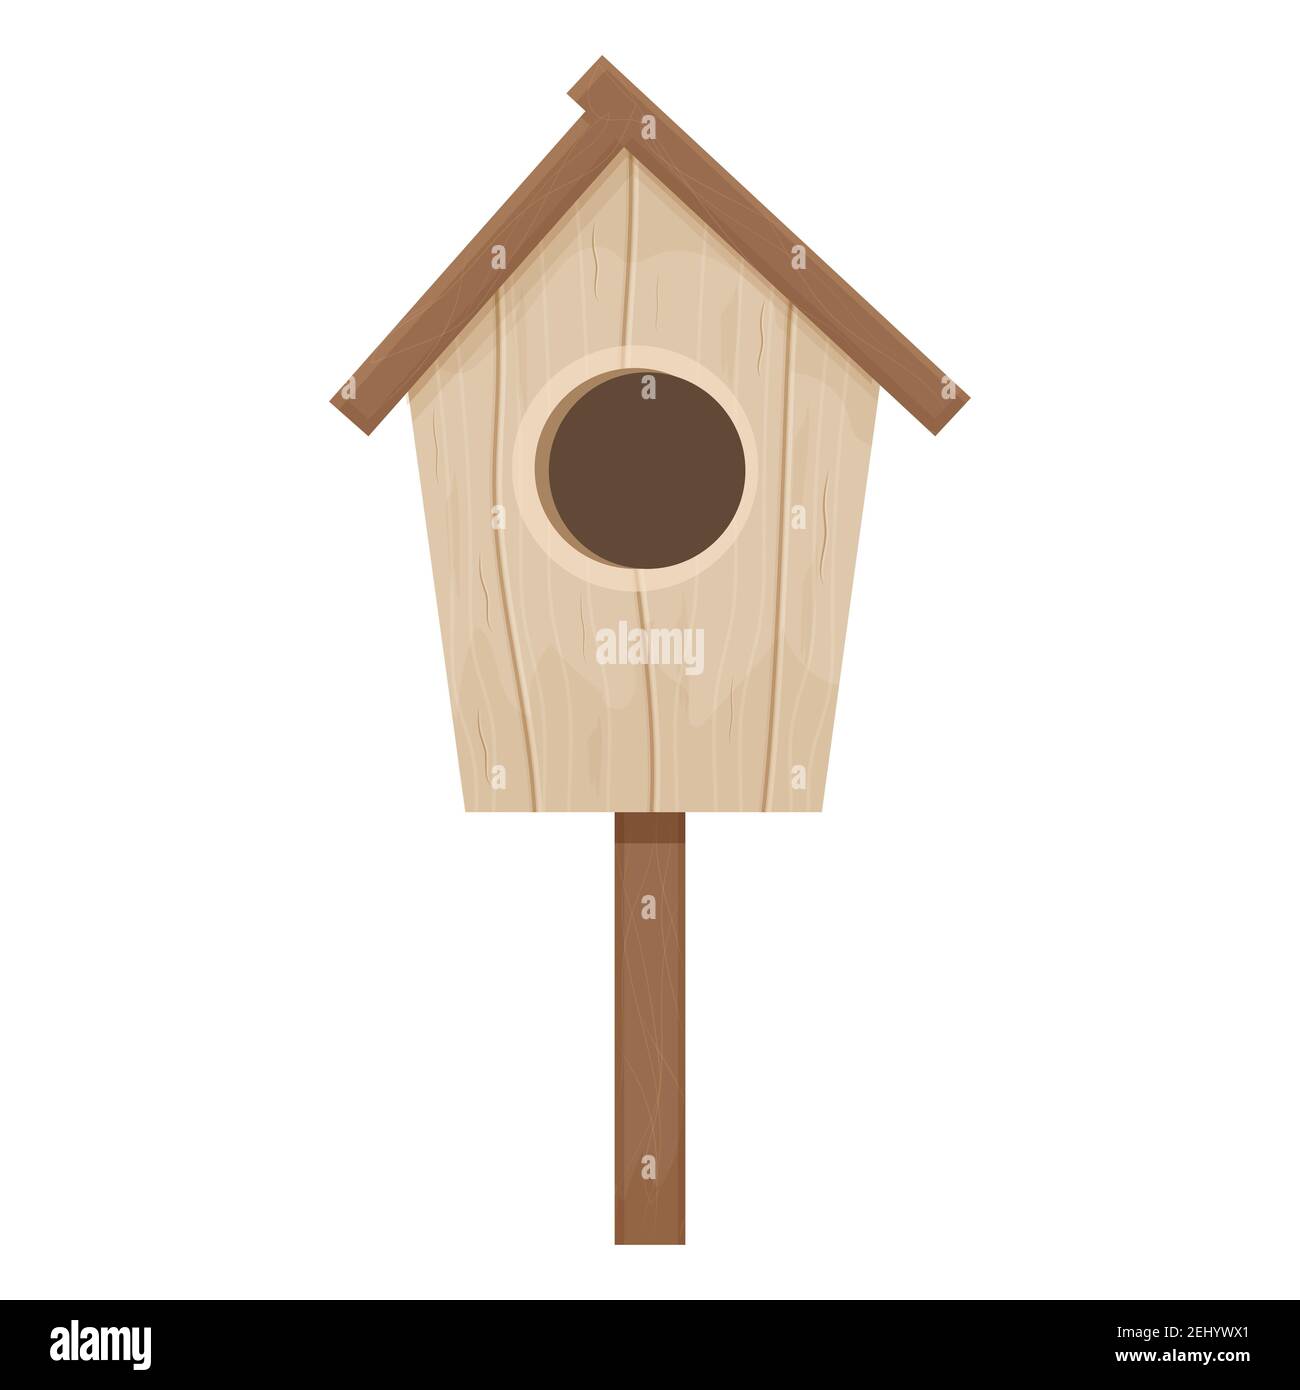 Wooden birdhouse, place for nest, empty decoration in cartoon flat style textured object isolated on white background. Springtime decoration, hanging Stock Vector